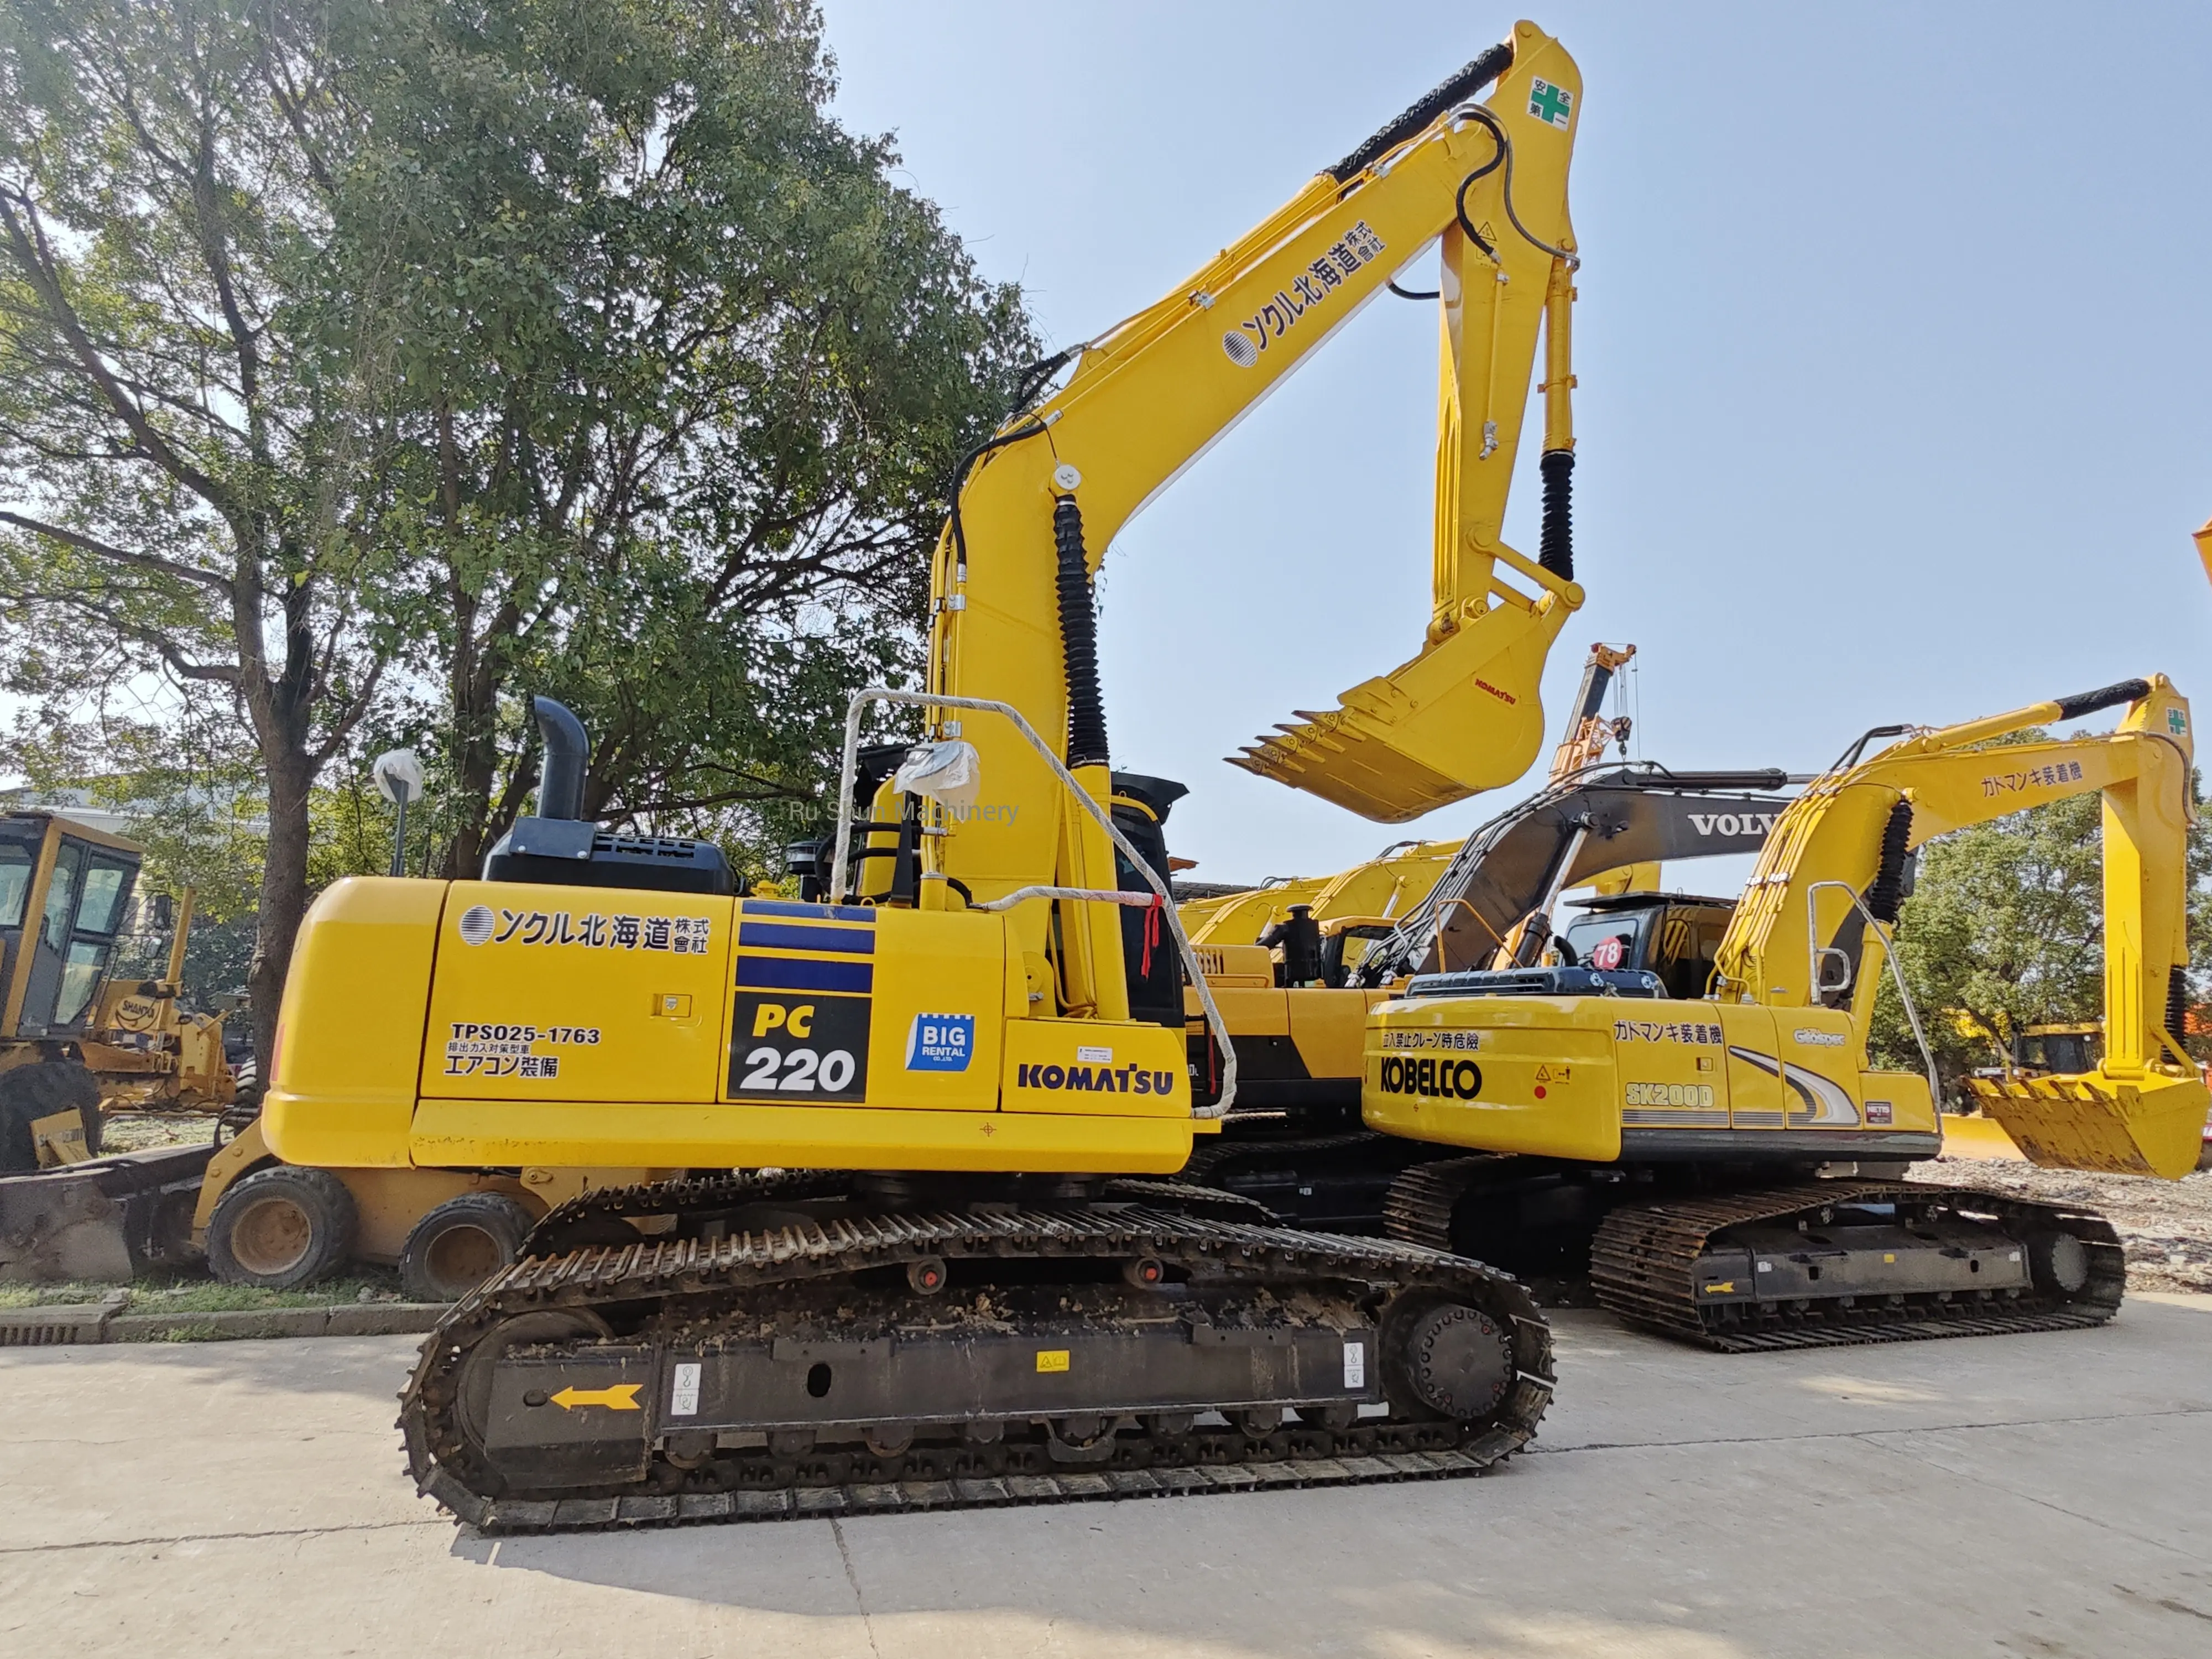 High Efficiency Used KOMATSU PC220-8 Second Hand Excavator For Sale